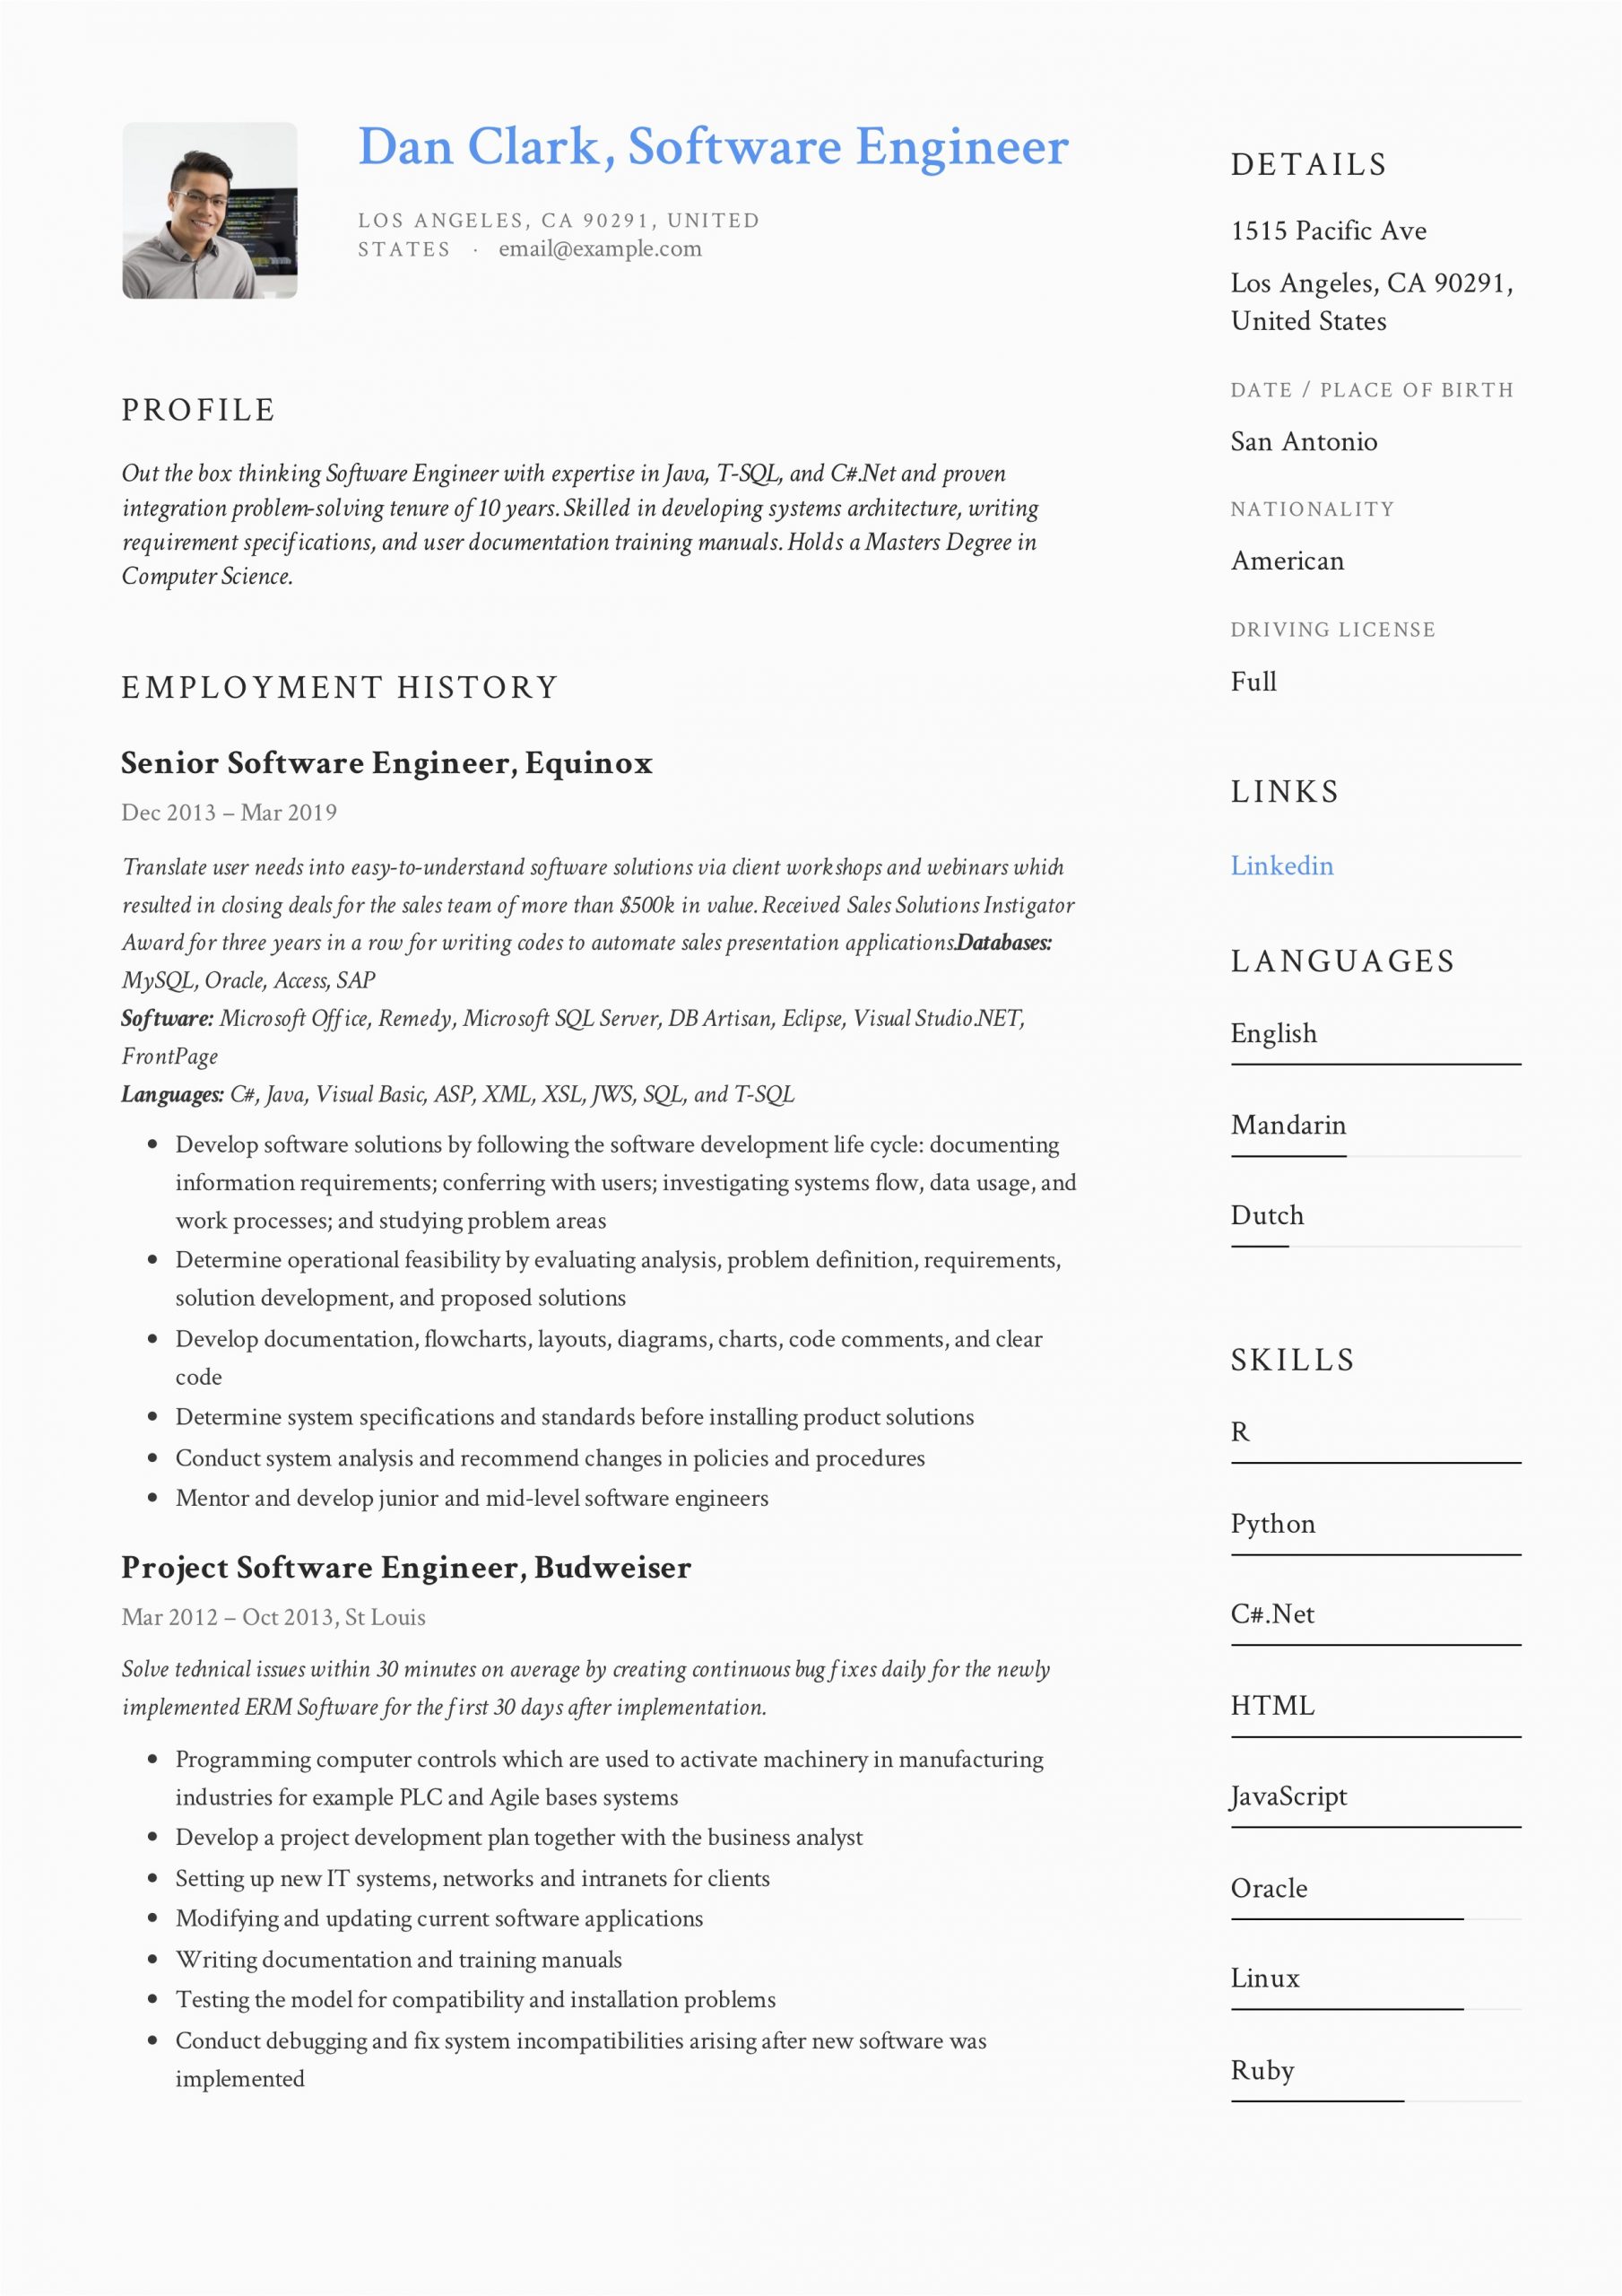 Download Resume Templates for software Engineer software Engineer Resume Writing Guide